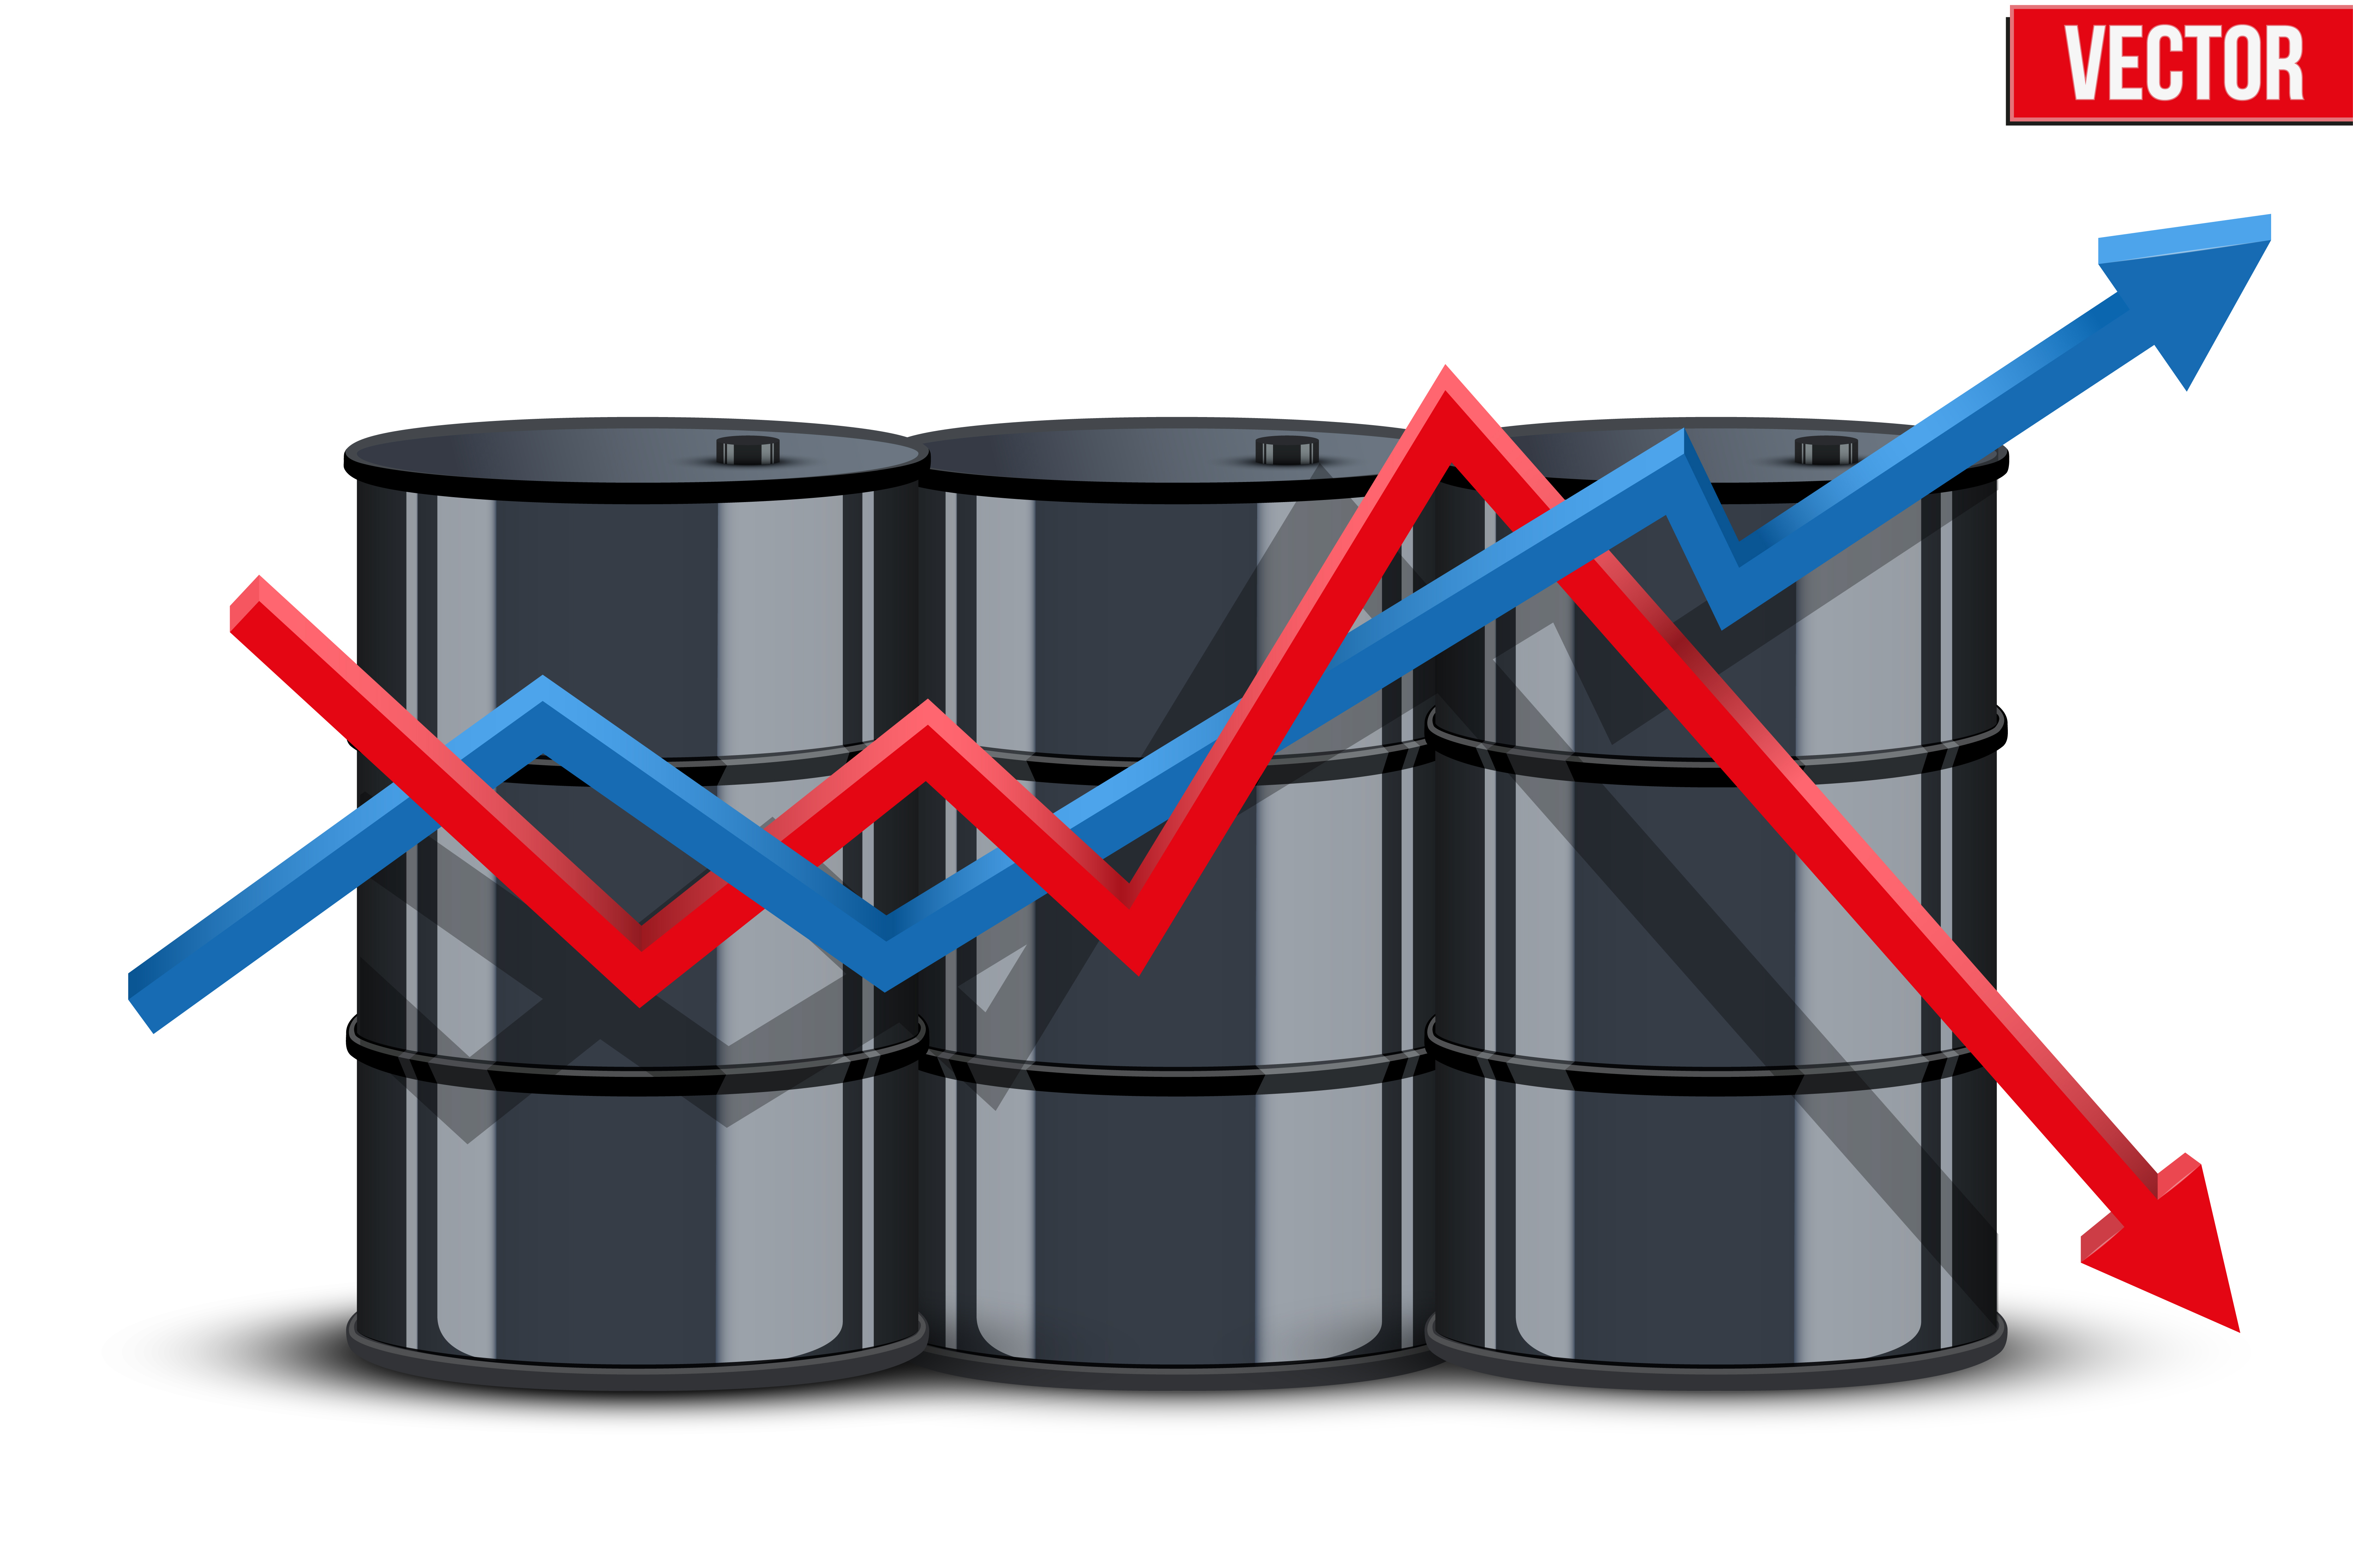 Use Weekly Options To Play Crude Oil